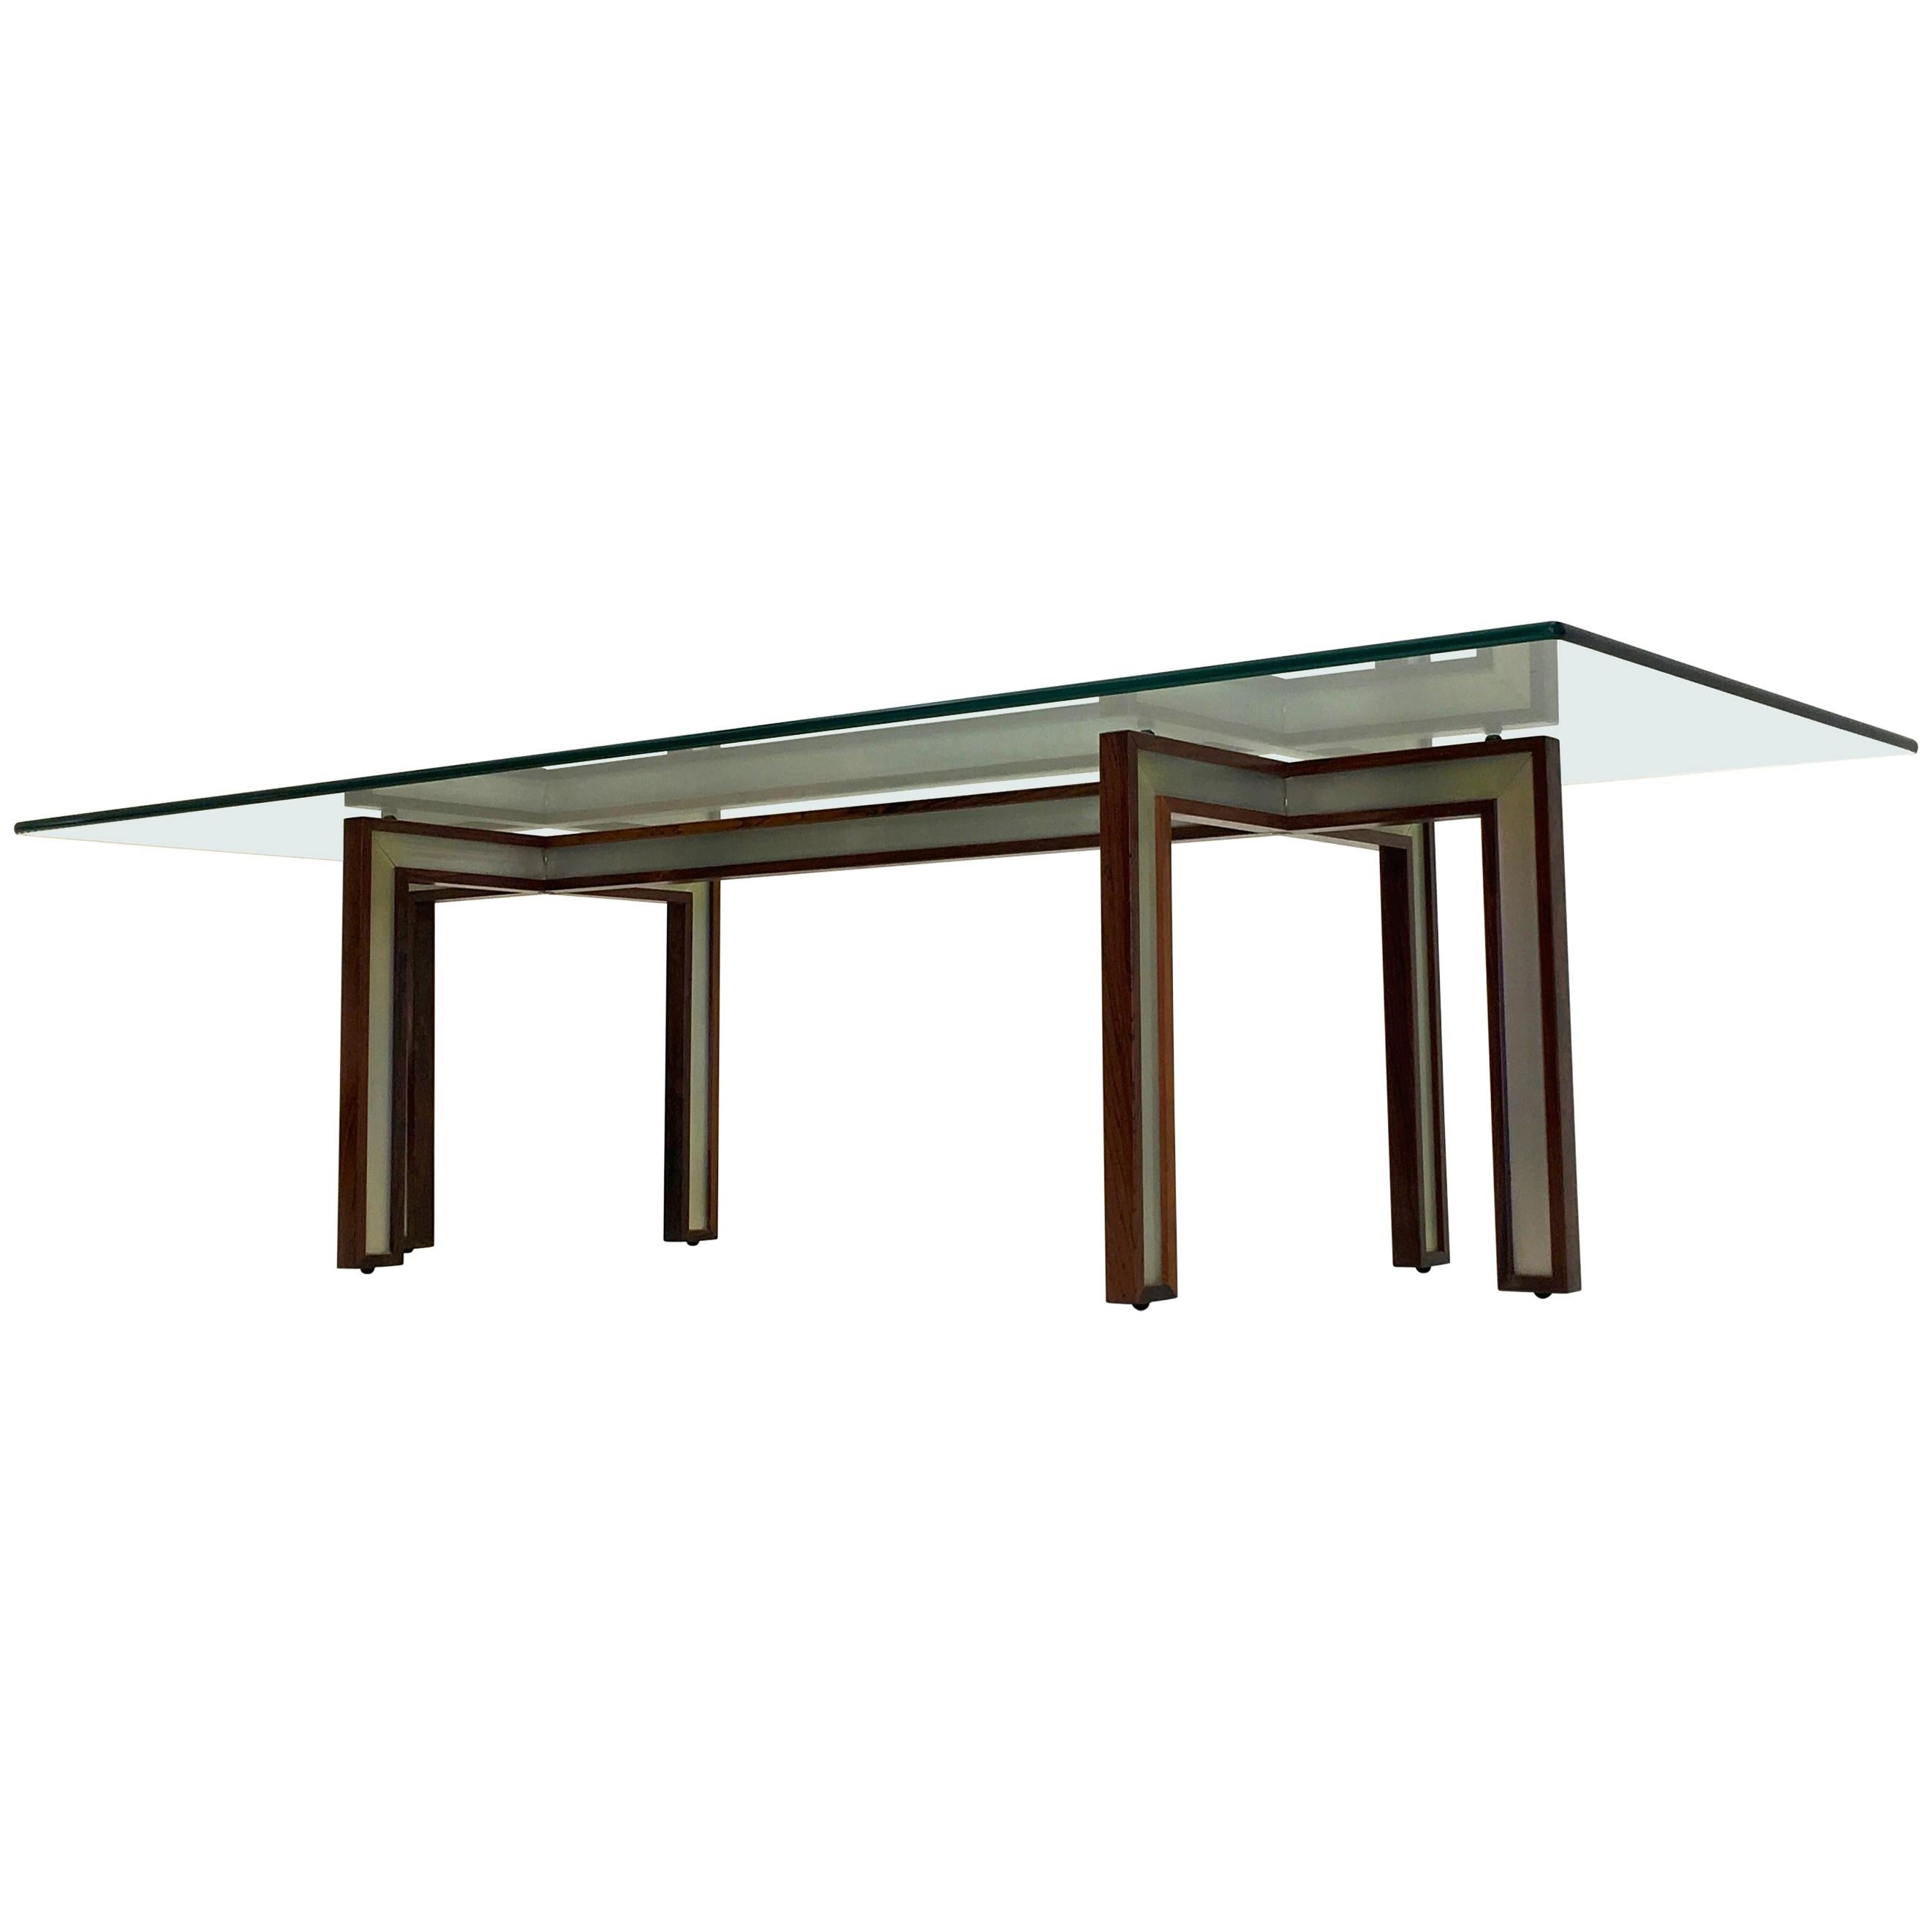 Danish Glass Coffee Table by Henning Korch with Rosewood and Aluminum ...